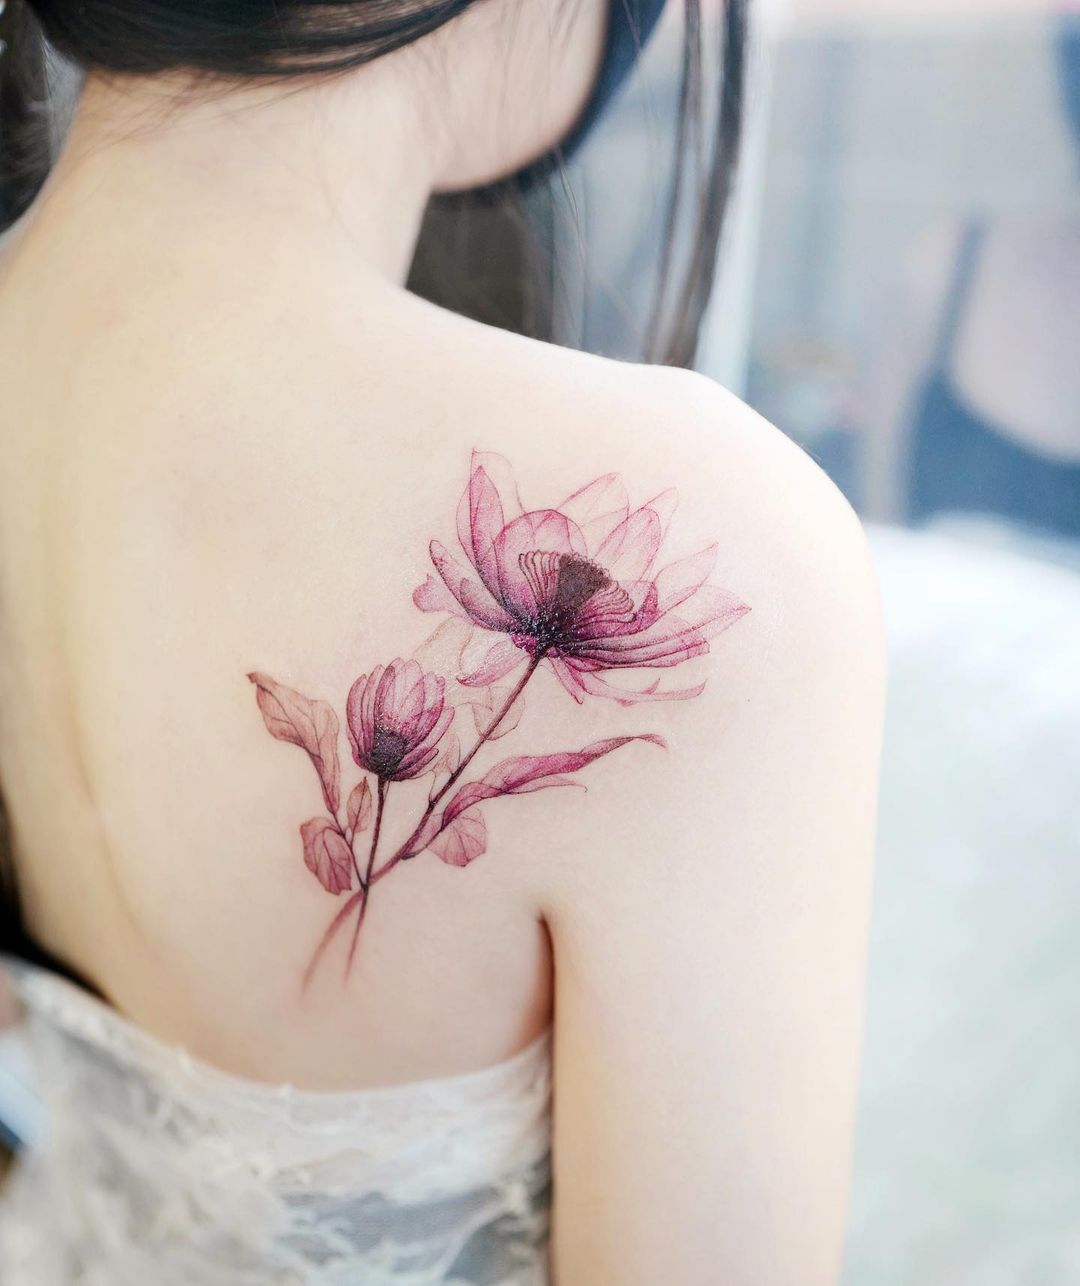 64 Inspiring Flower Tattoos to Come Up with a Great Idea - Hairstylery